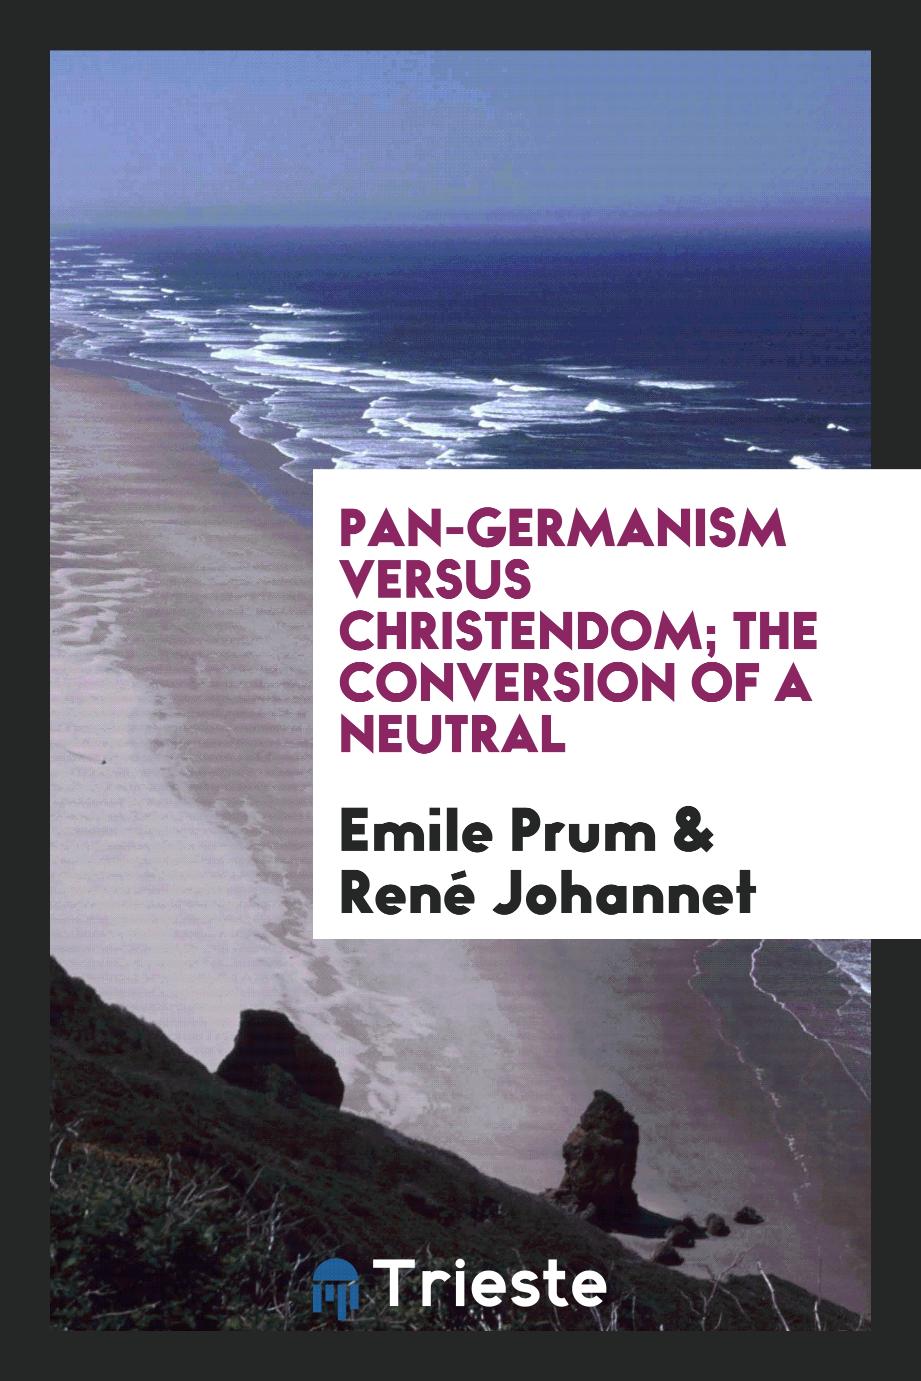 Pan-Germanism versus Christendom; the conversion of a neutral